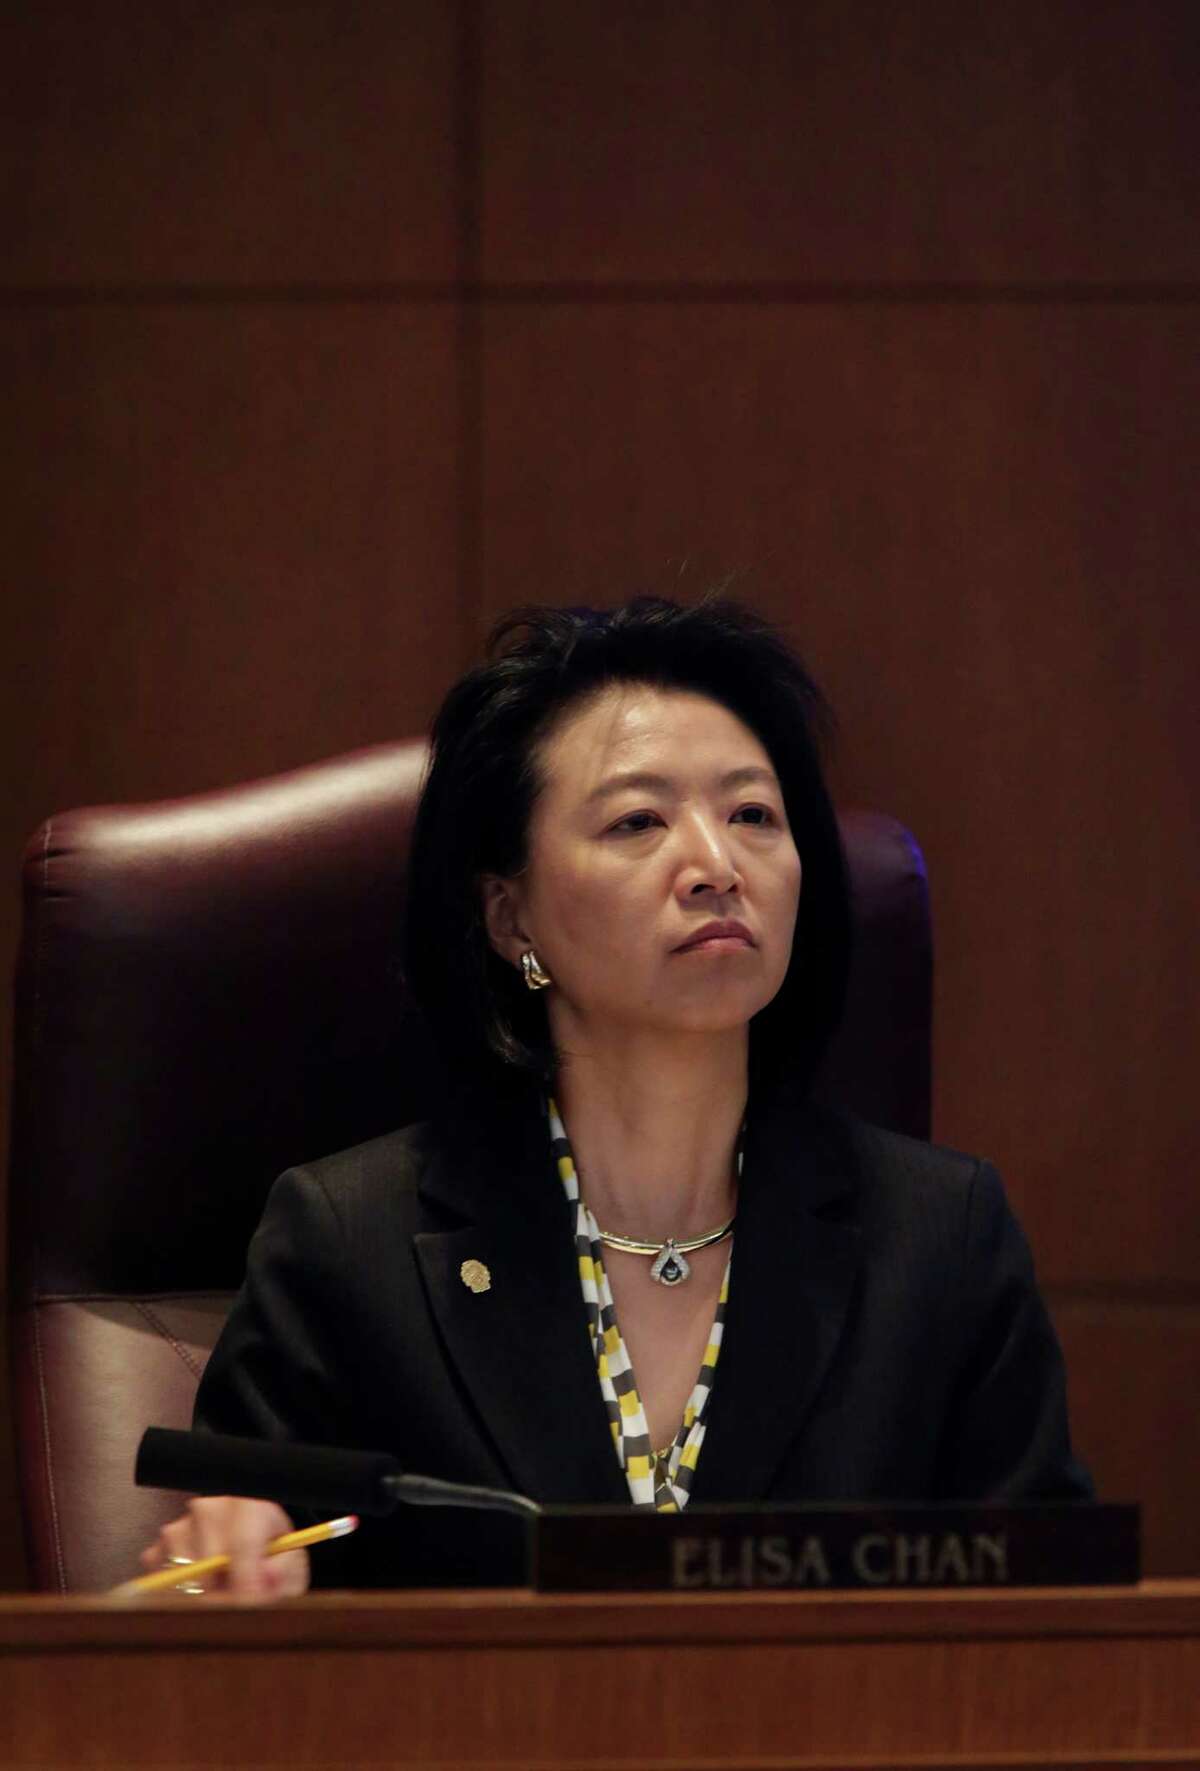 City Council member Elisa Chan listens to arguments during Session B in City Council Chambers for the Nondiscrimination Ordinance meeting at City Hall on Wednesday, August 28, 2013.